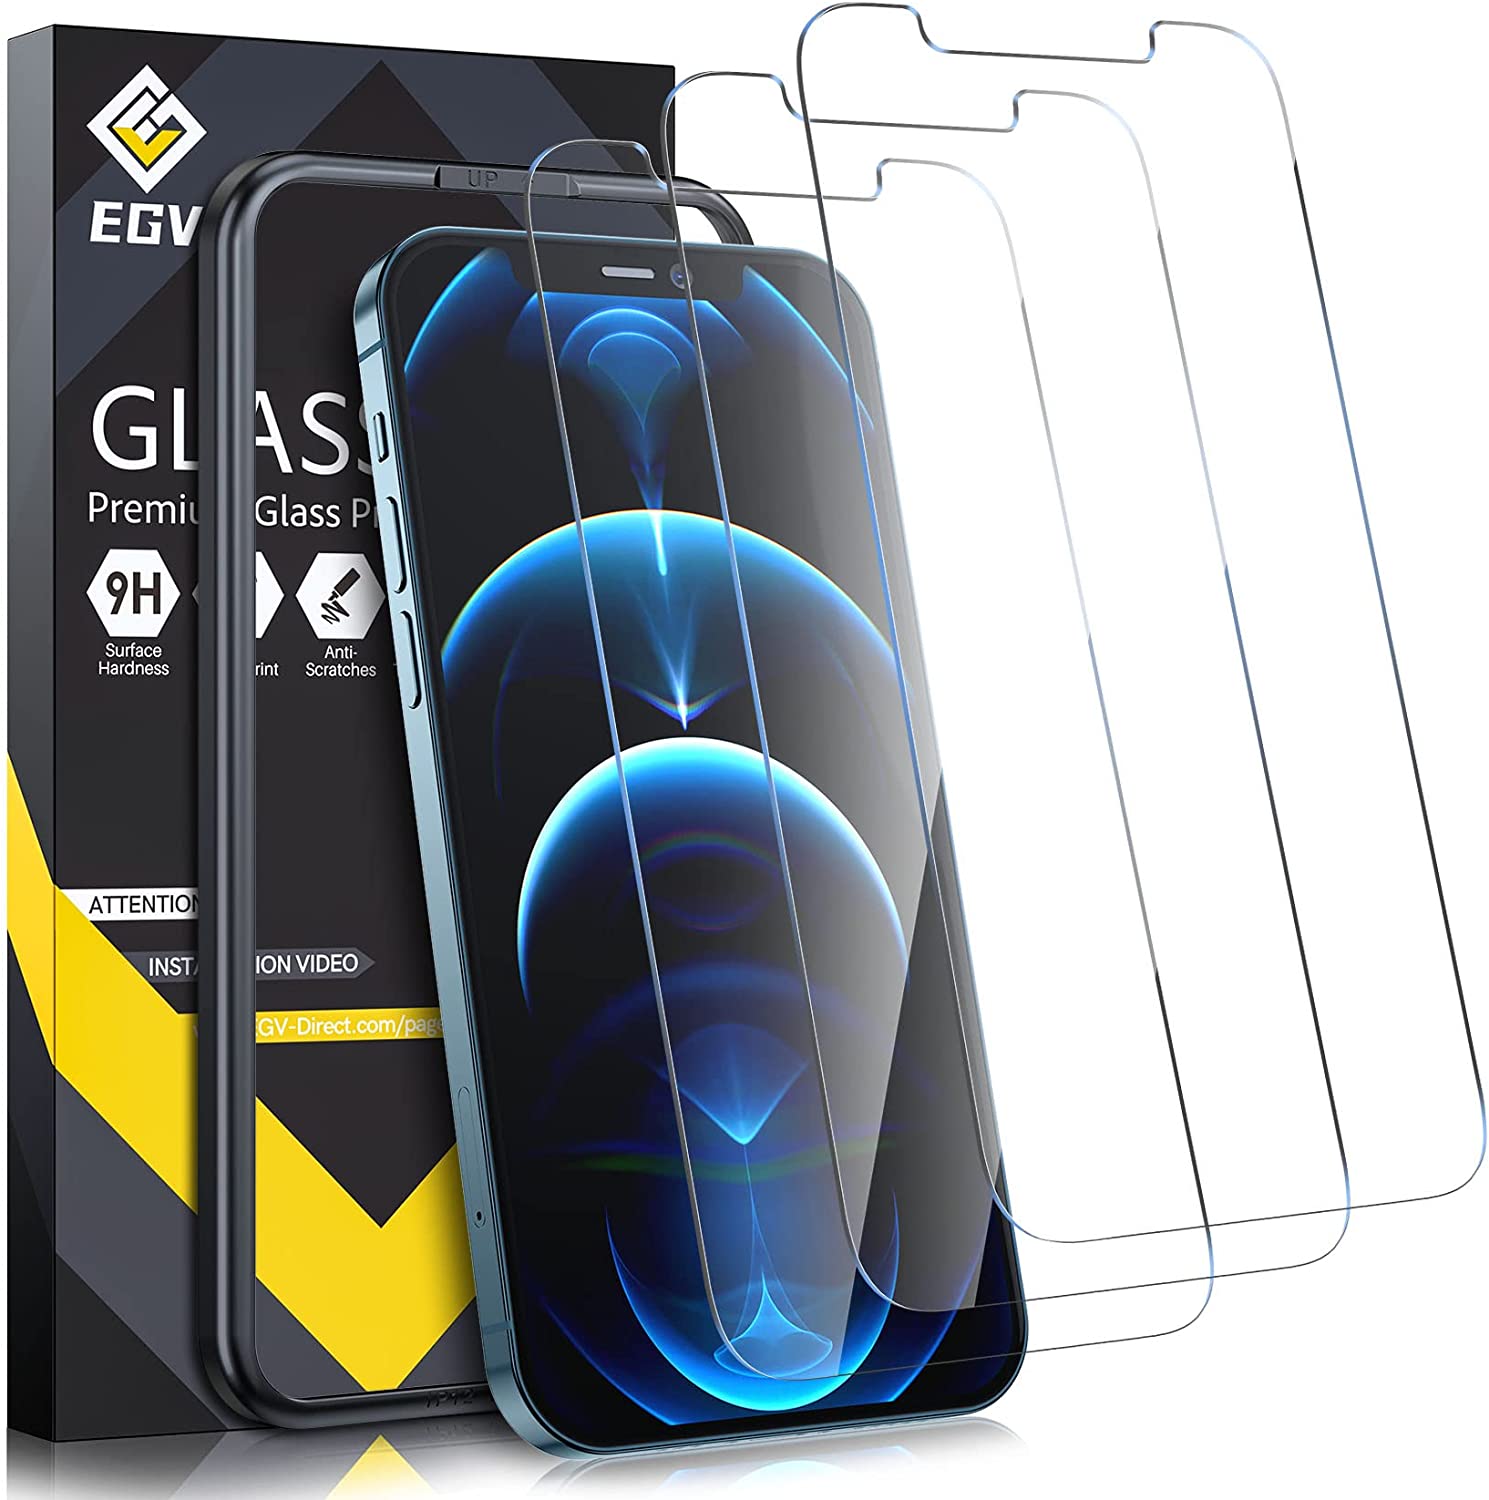 EGV 3+3 Tempered Glass Screen Protector Iphone 12 RRP £6.99 CLEARANCE XL £4.99